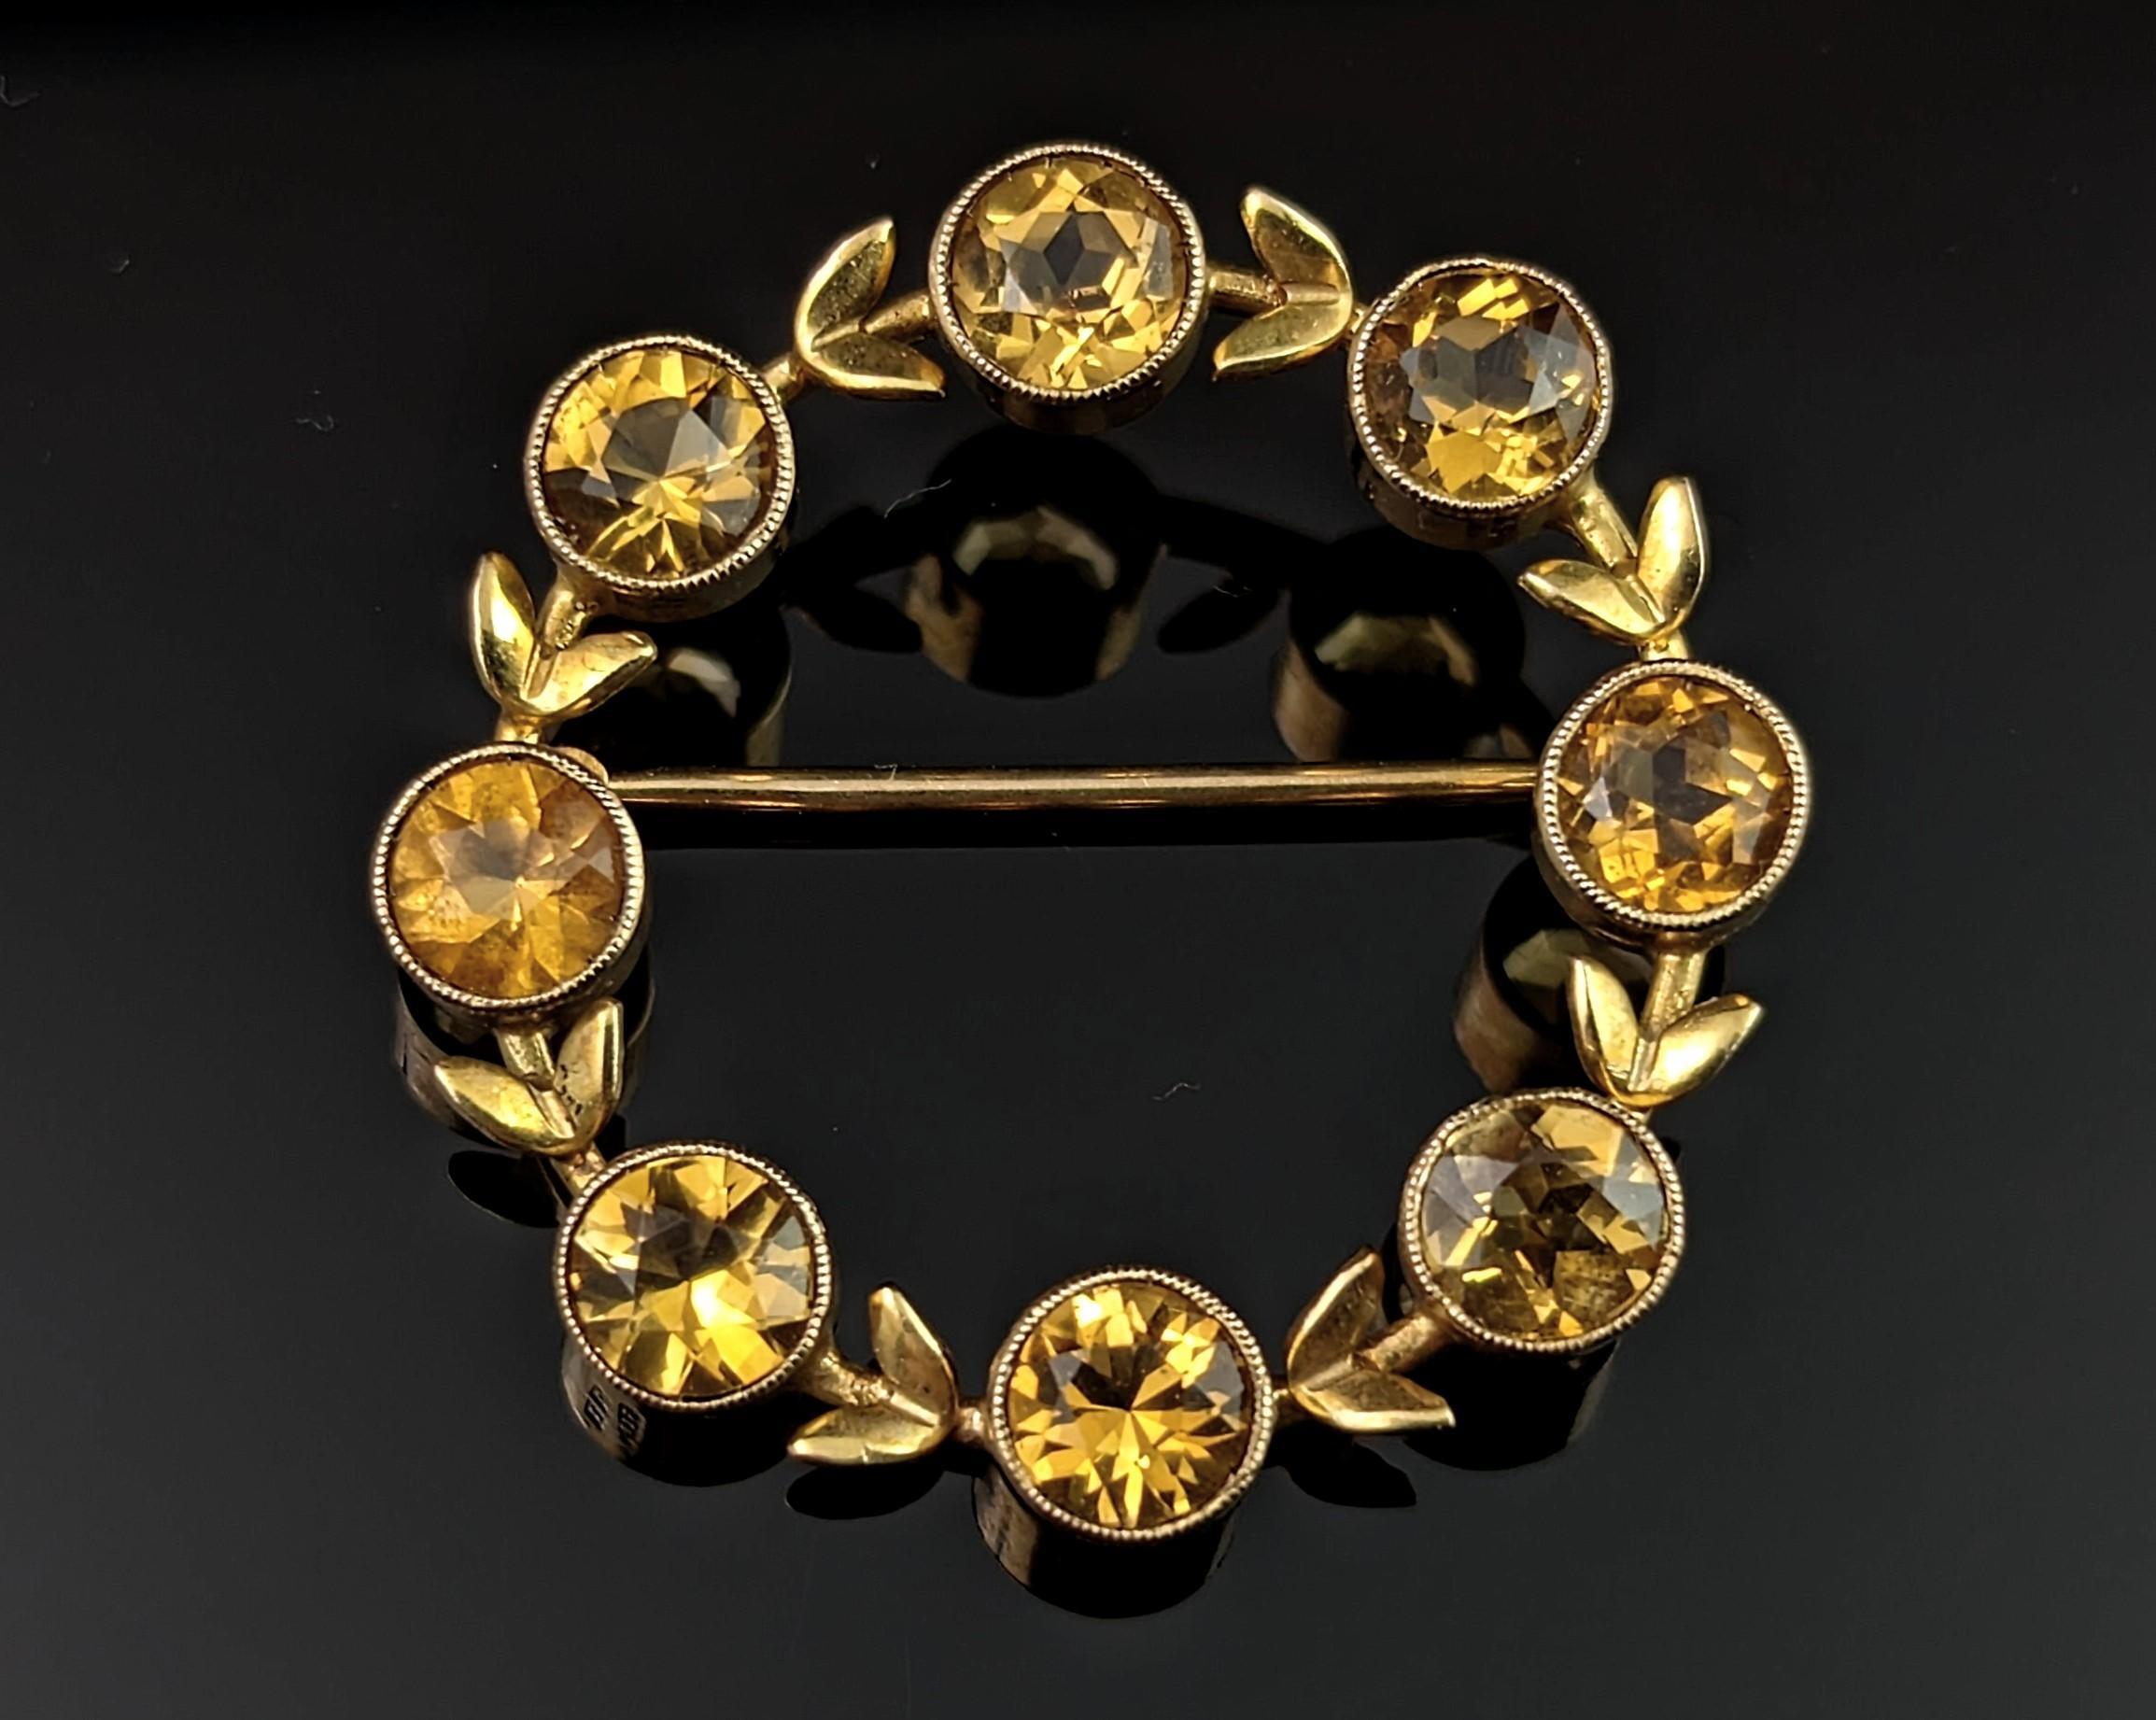 This beautiful vintage wreath brooch by Cropp and Farr is a real stunner, with the deep yellow Citrine and the rich 9kt yellow gold, this brooch really gives me a lovely warm feeling.

It is nicely designed as a circular shaped wreath with gold